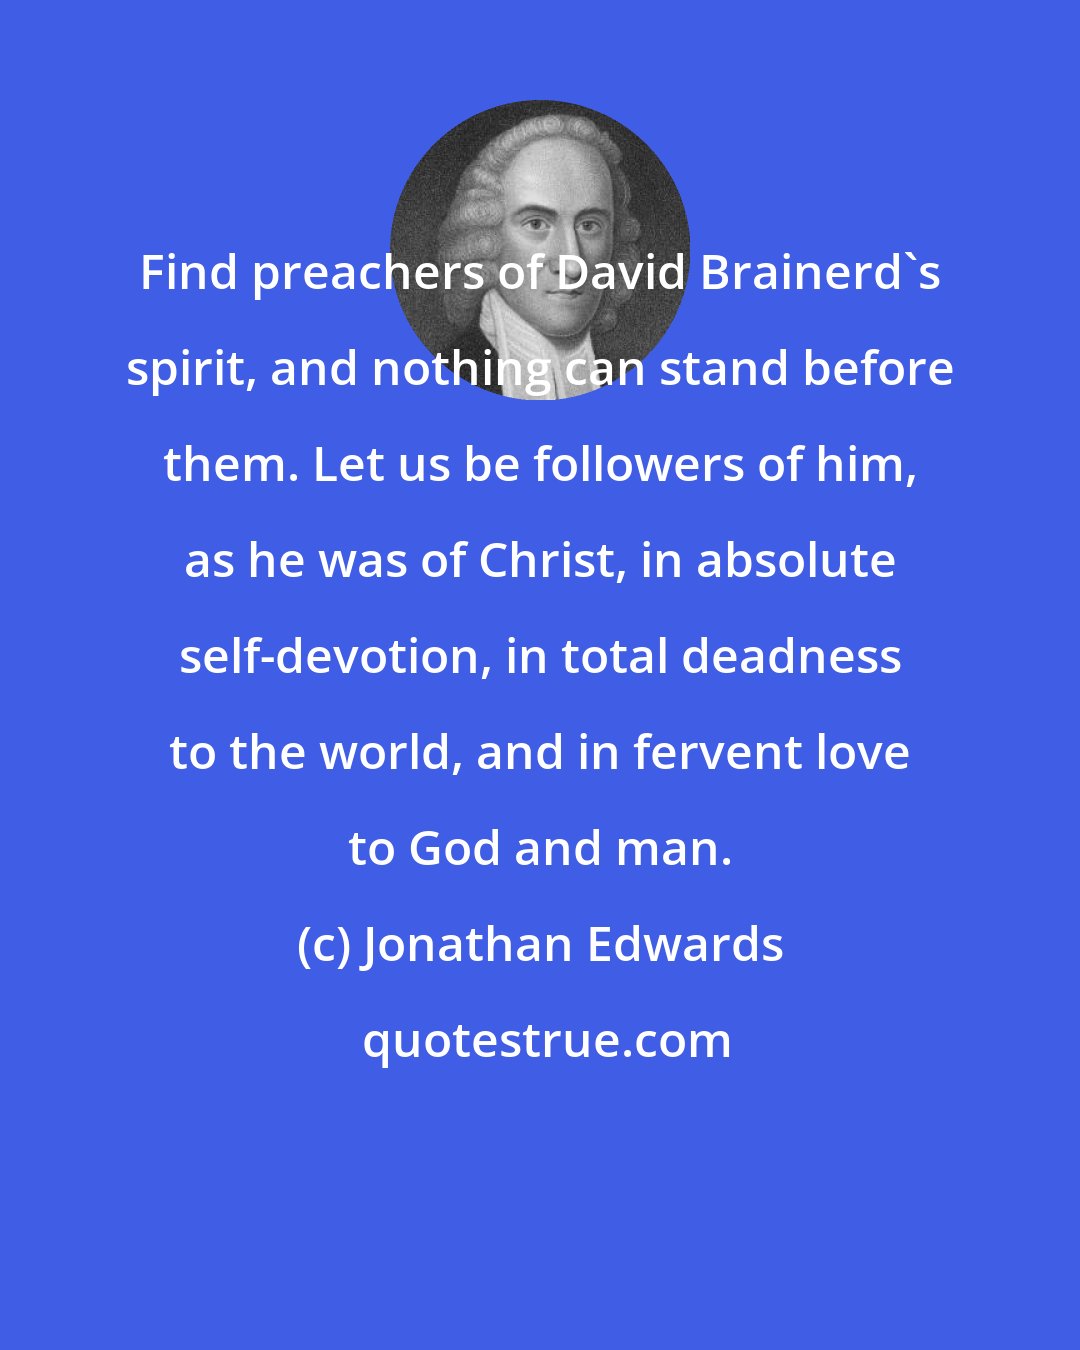 Jonathan Edwards: Find preachers of David Brainerd's spirit, and nothing can stand before them. Let us be followers of him, as he was of Christ, in absolute self-devotion, in total deadness to the world, and in fervent love to God and man.